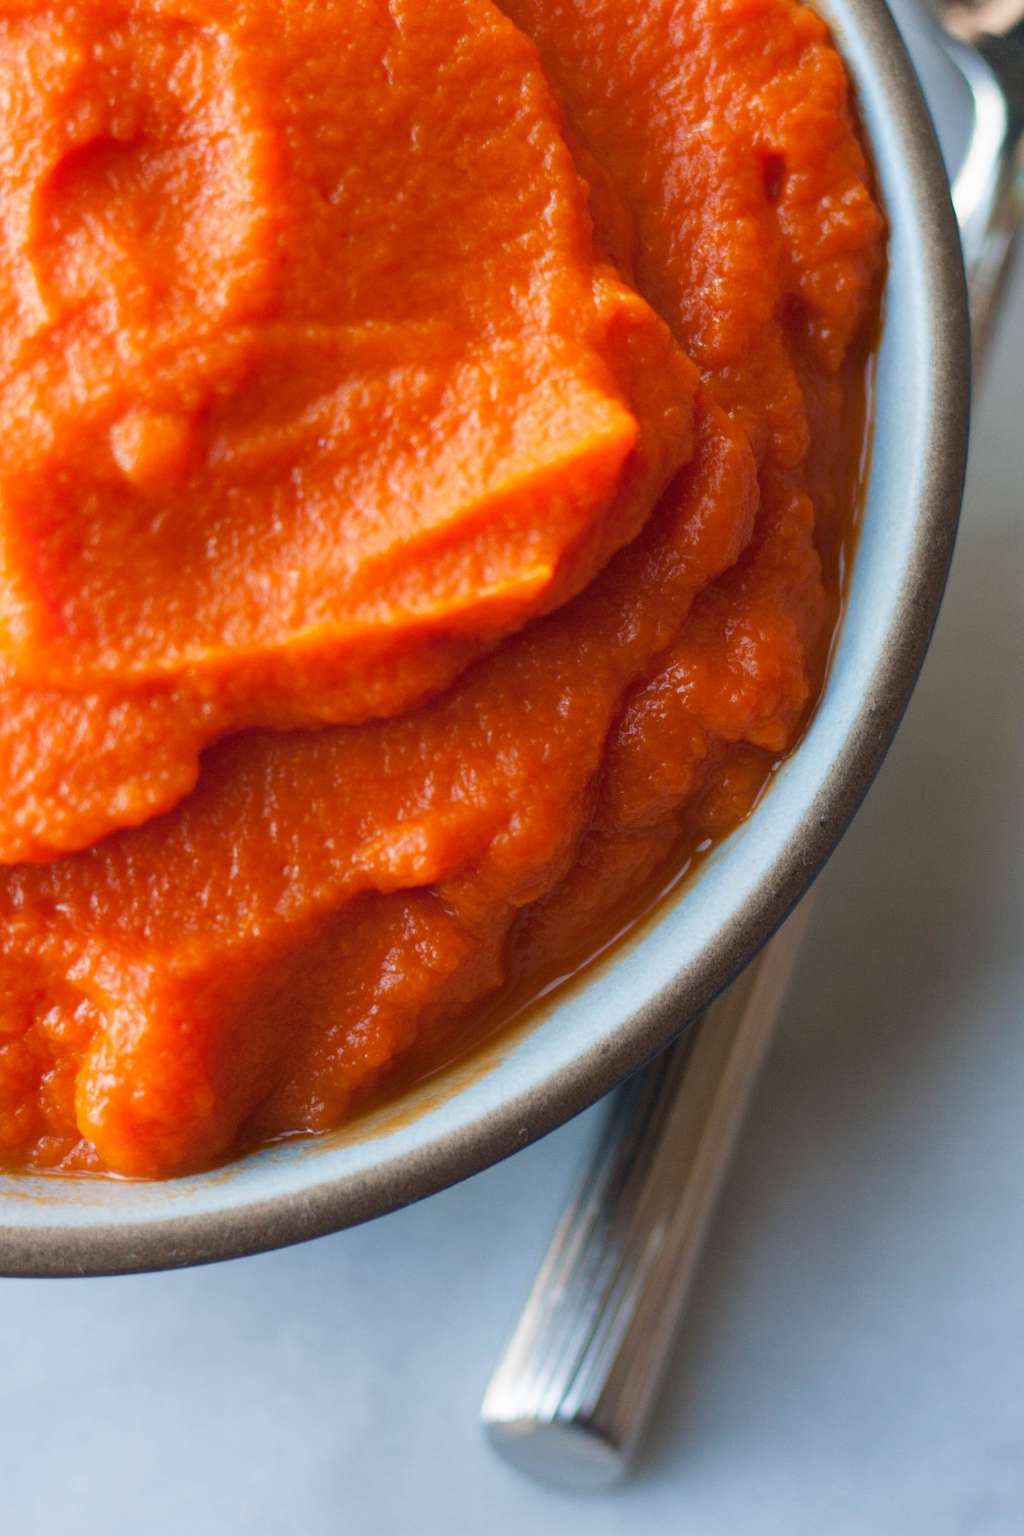 Carrot Puree Is Baby Food That Grownups Should Love Too | Kitchn